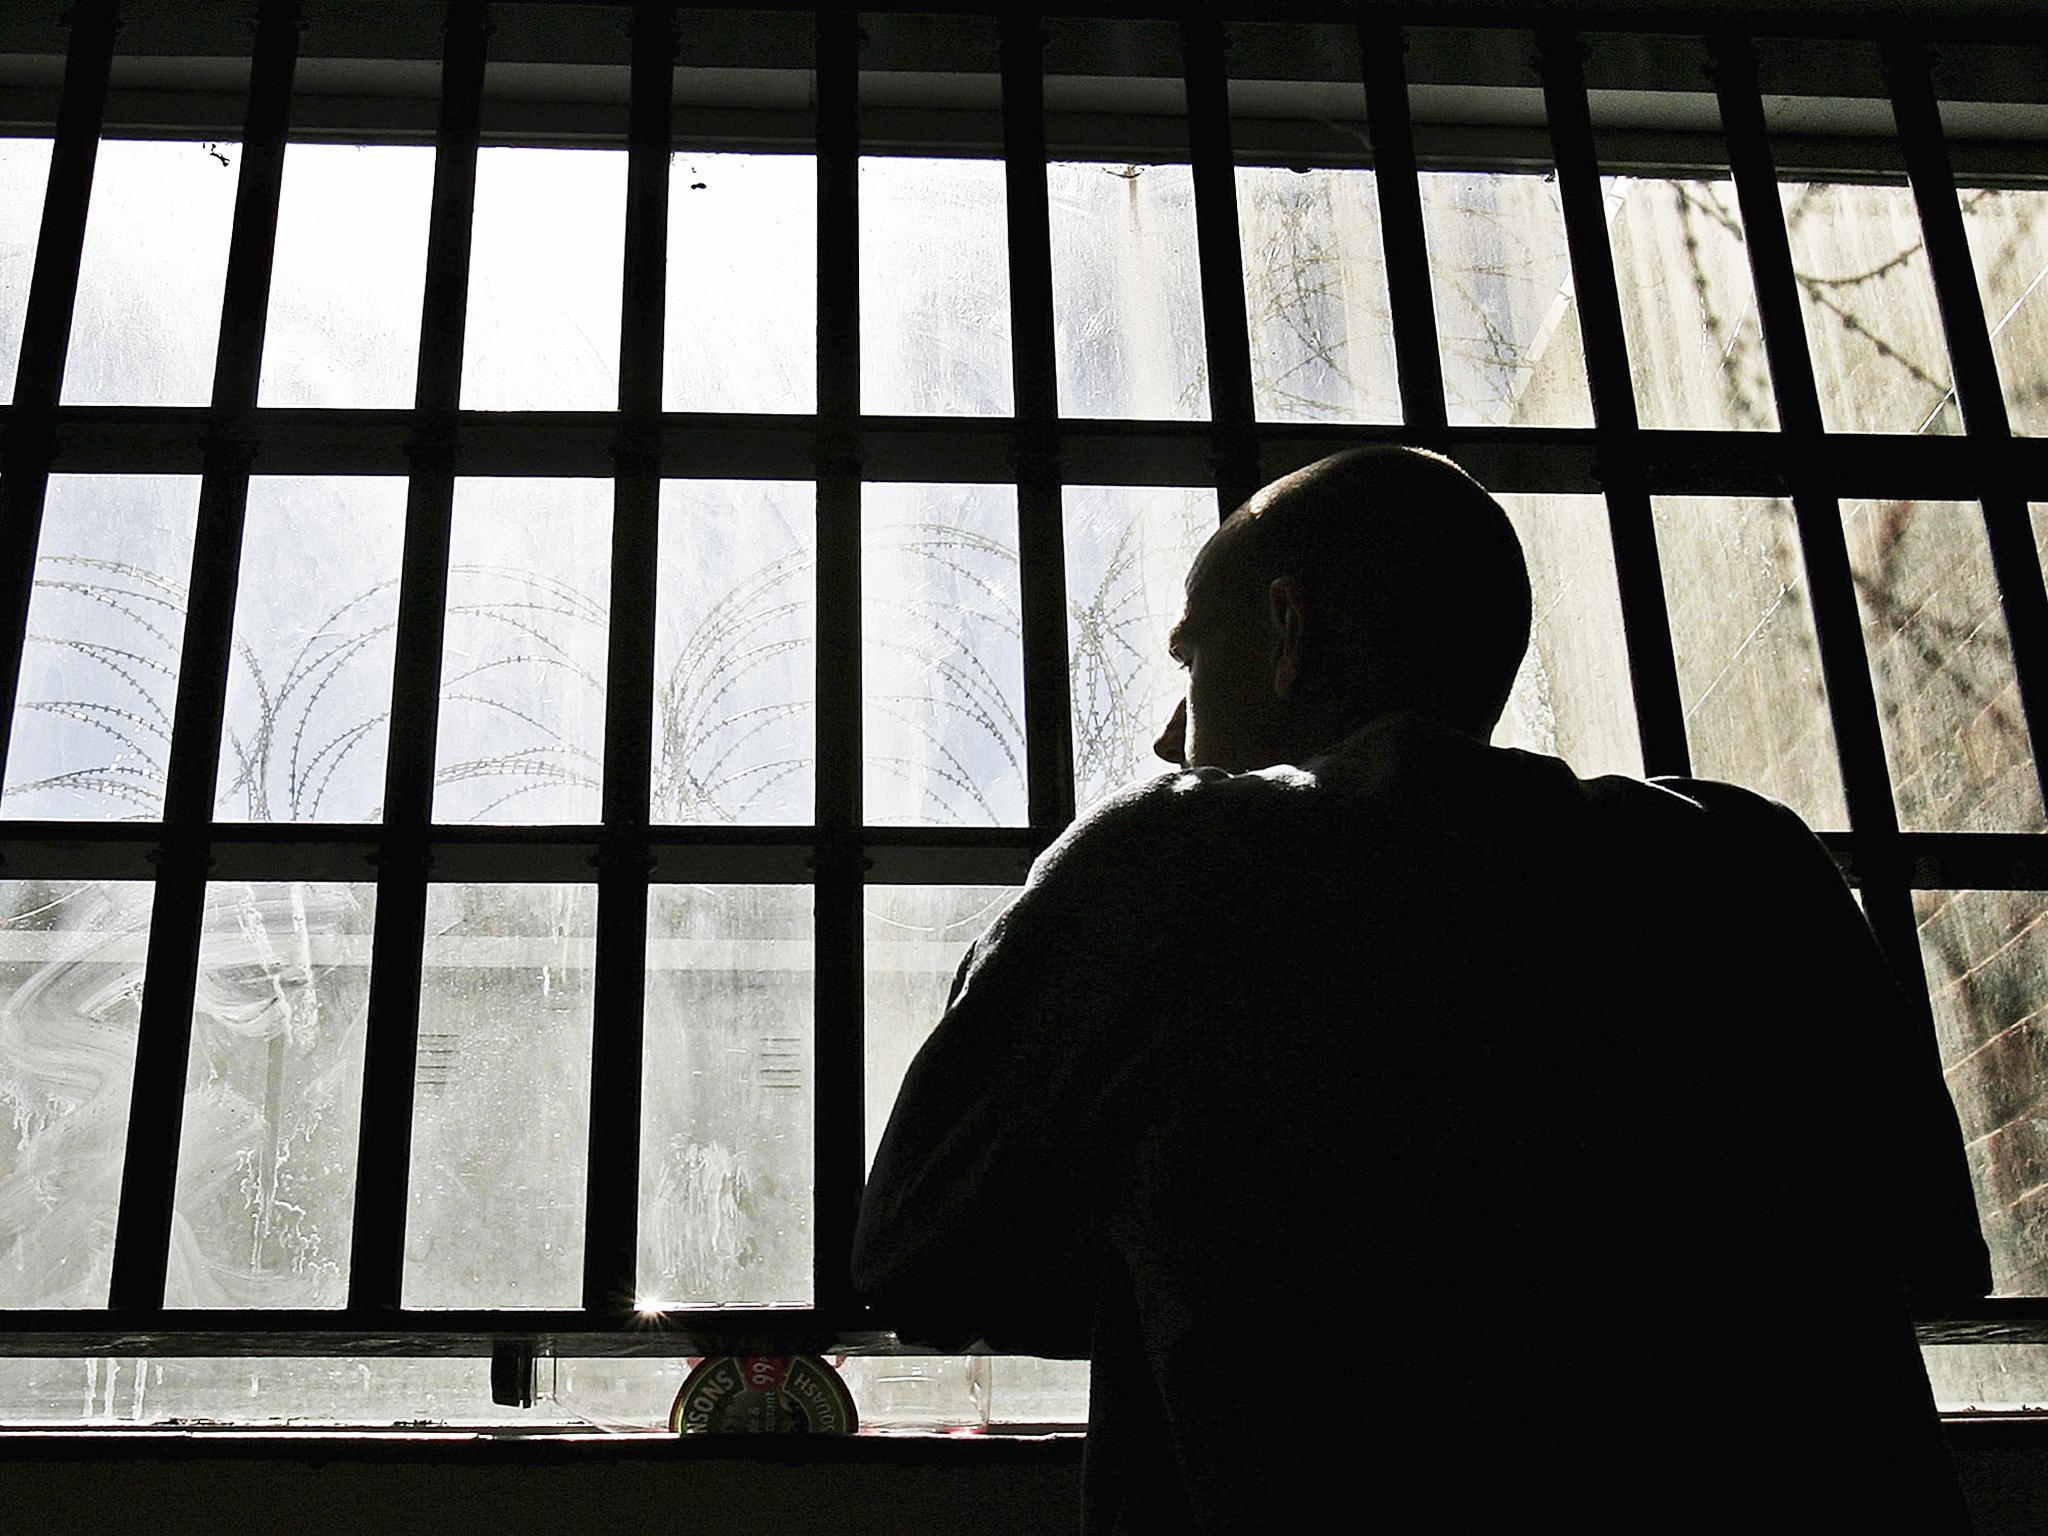 Six Prisoners Kill Themselves In Less Than Two Years At Notorious UK 